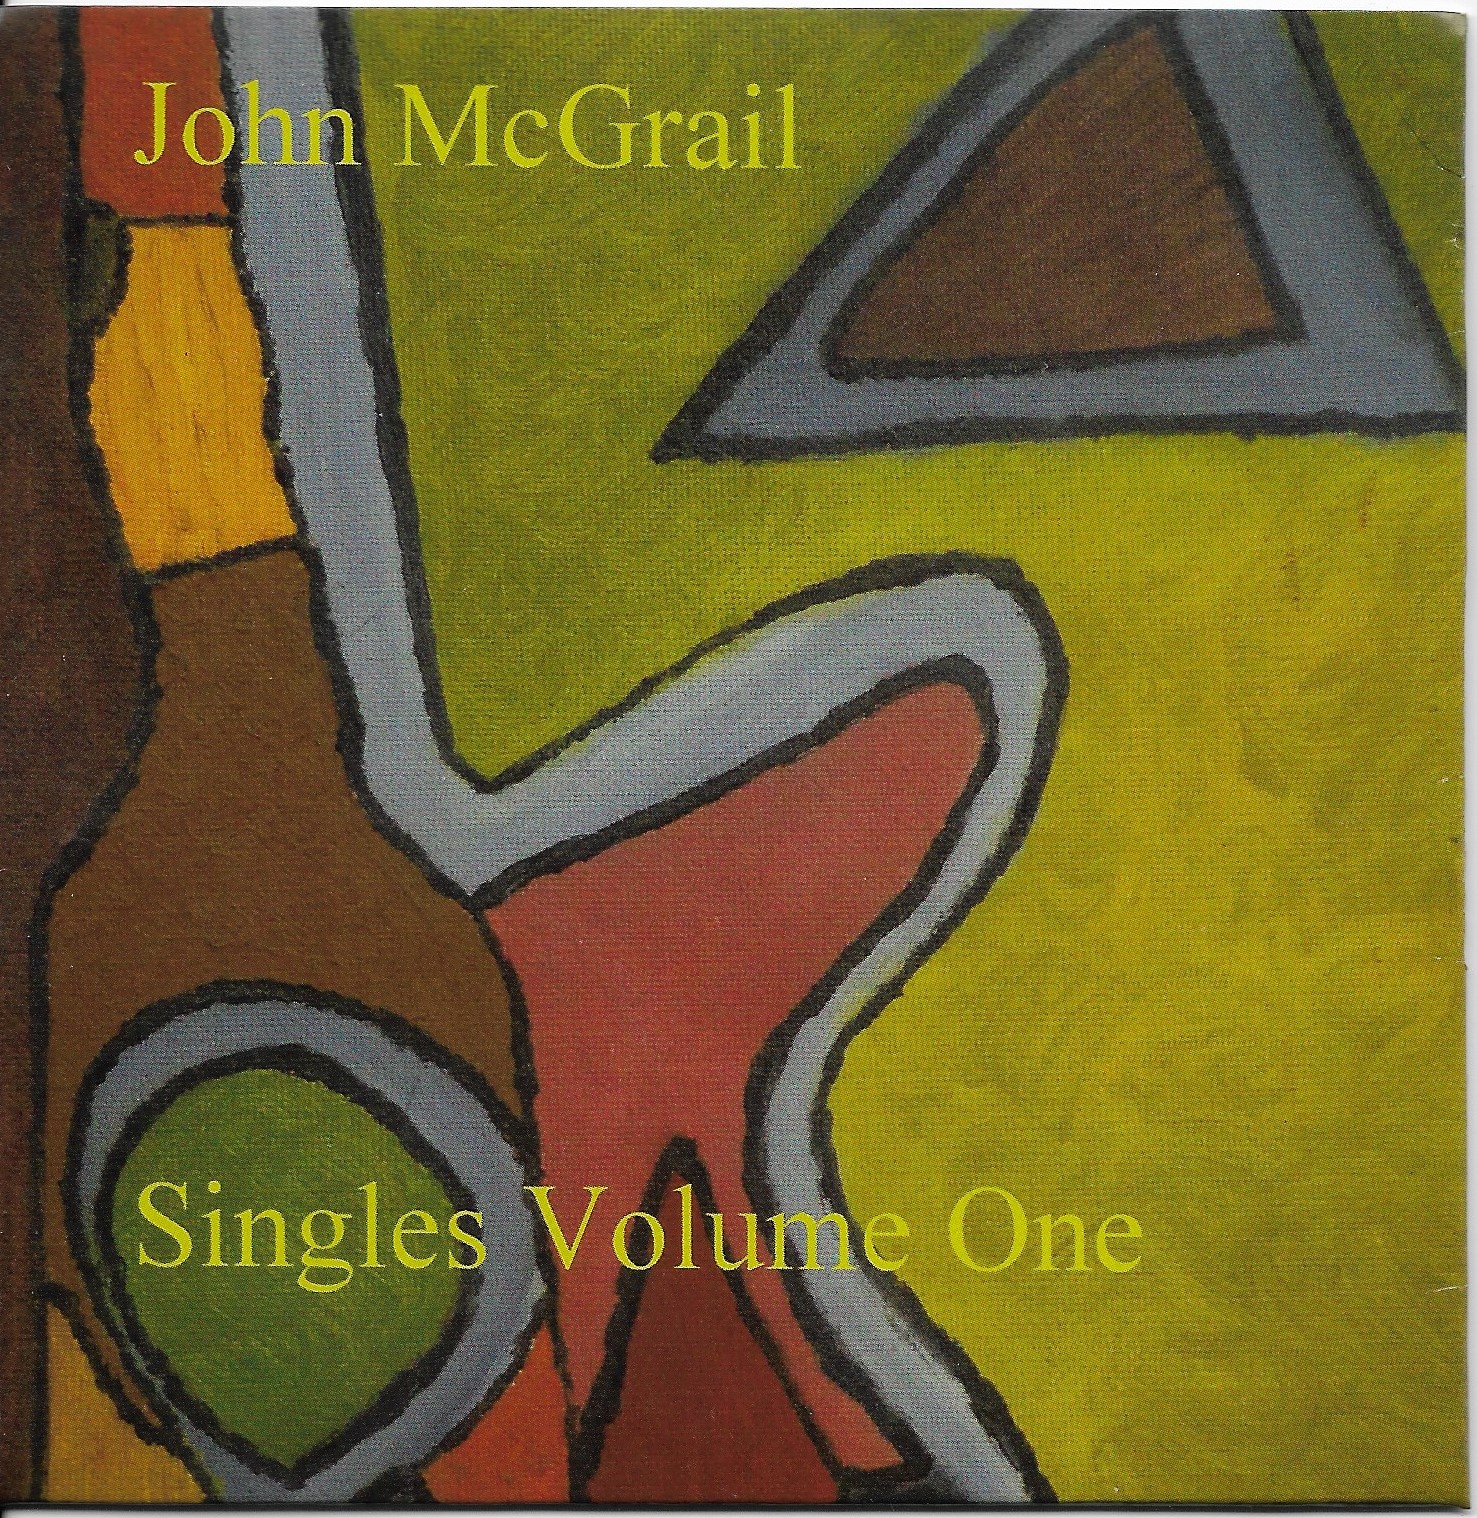 Art for Can't Find My Way Back Home by John McGrail